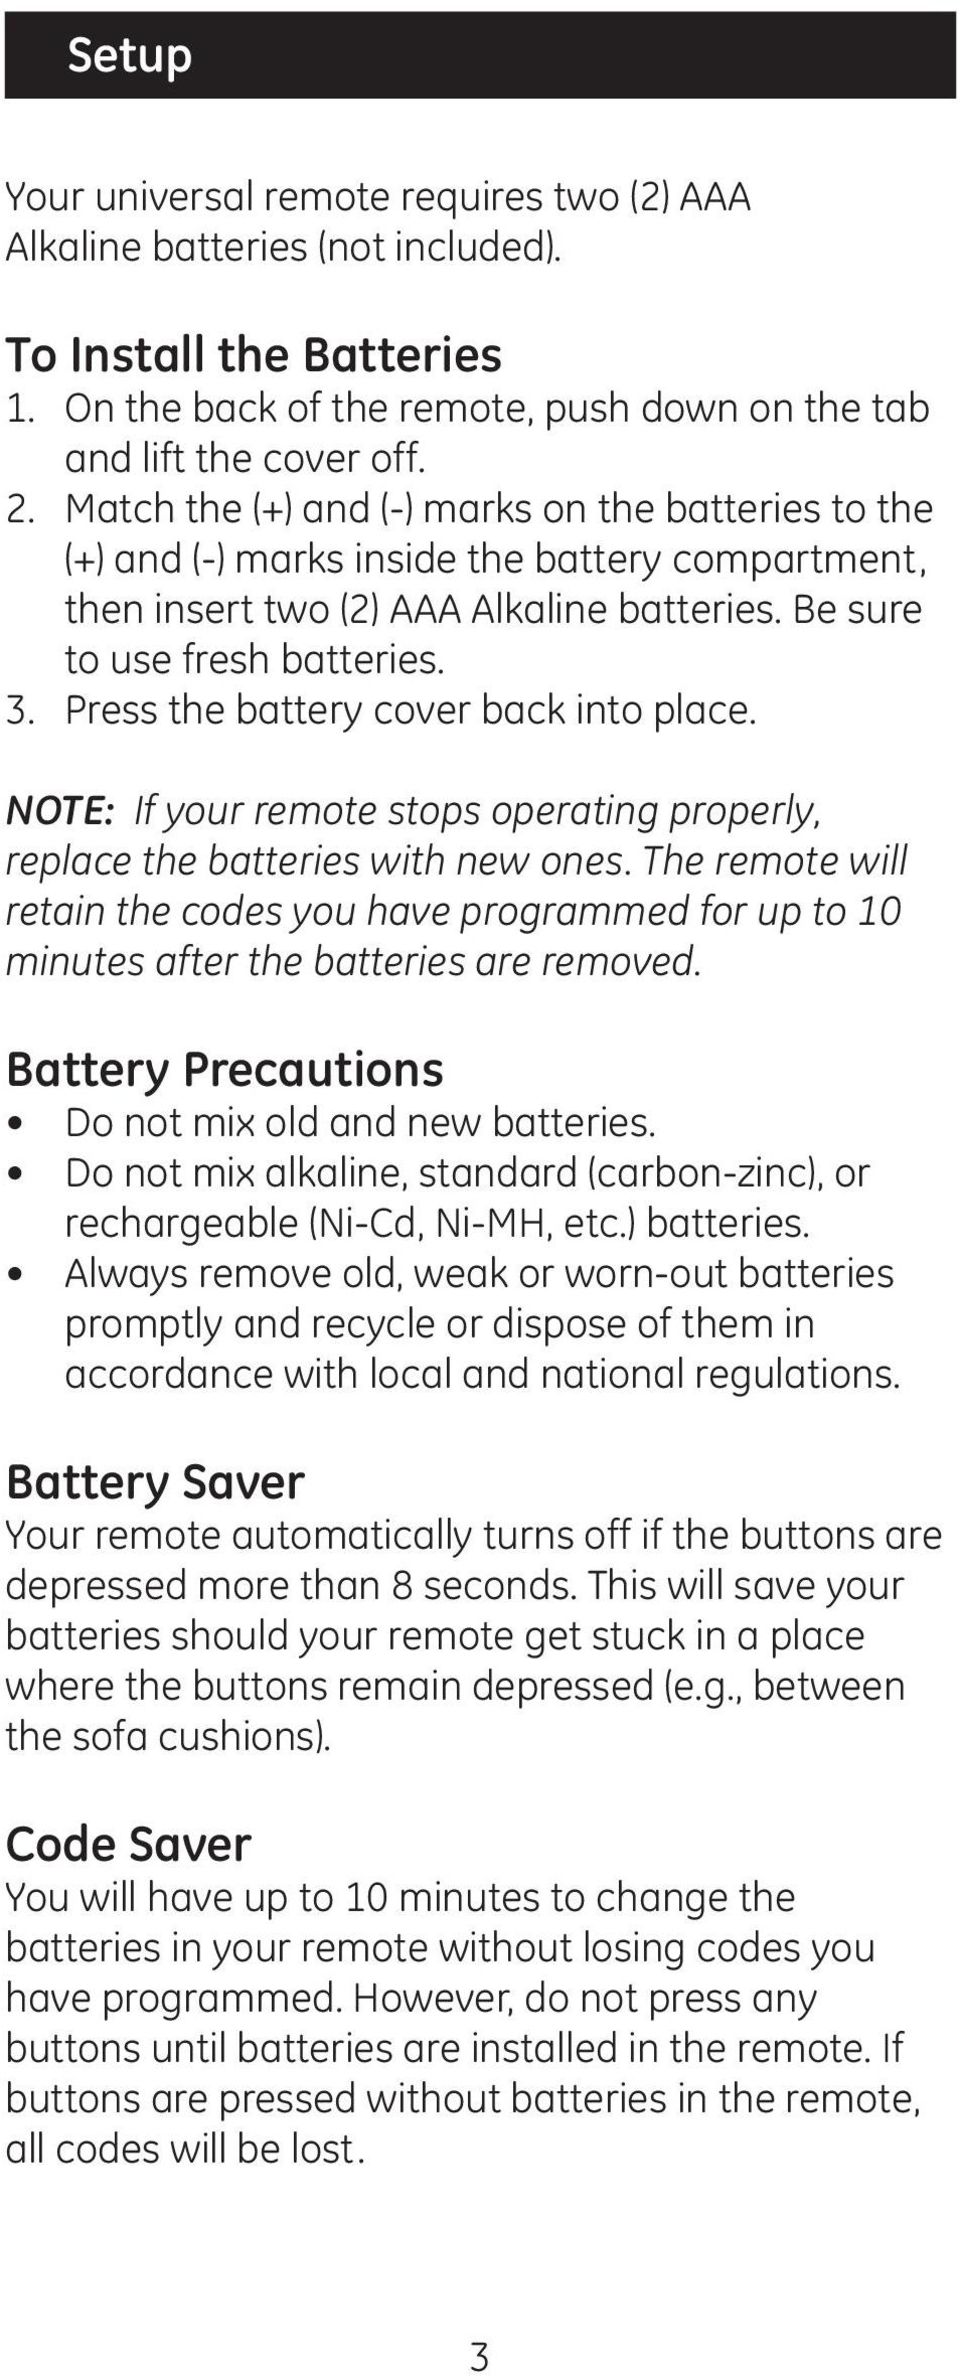 Press the battery cover back into place. NOTE: If your remote stops operating properly, replace the batteries with new ones.